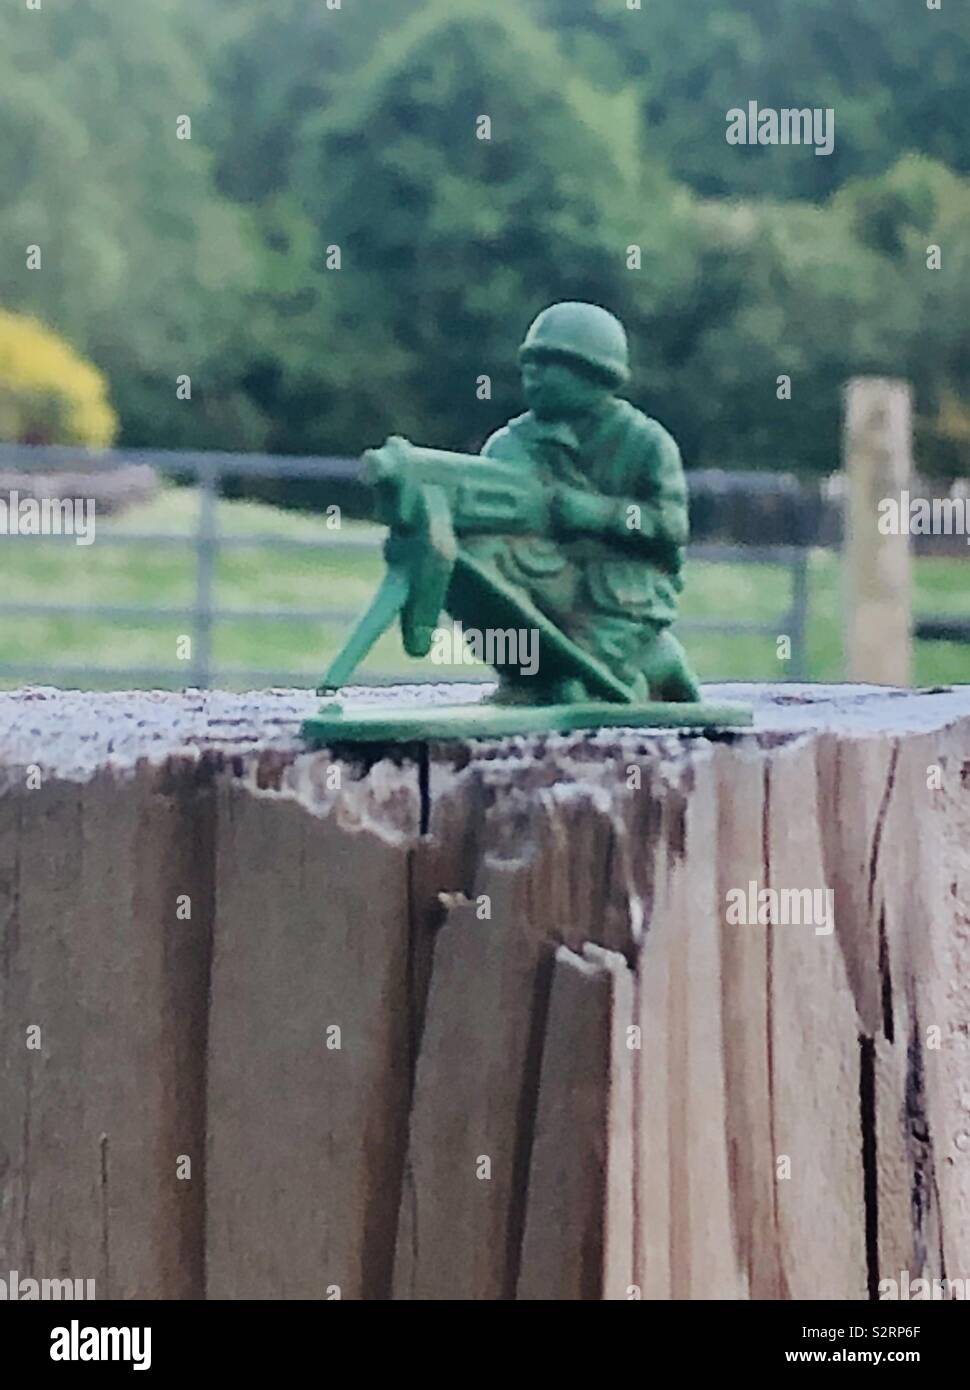 Green toy army man on wood fence post Stock Photo